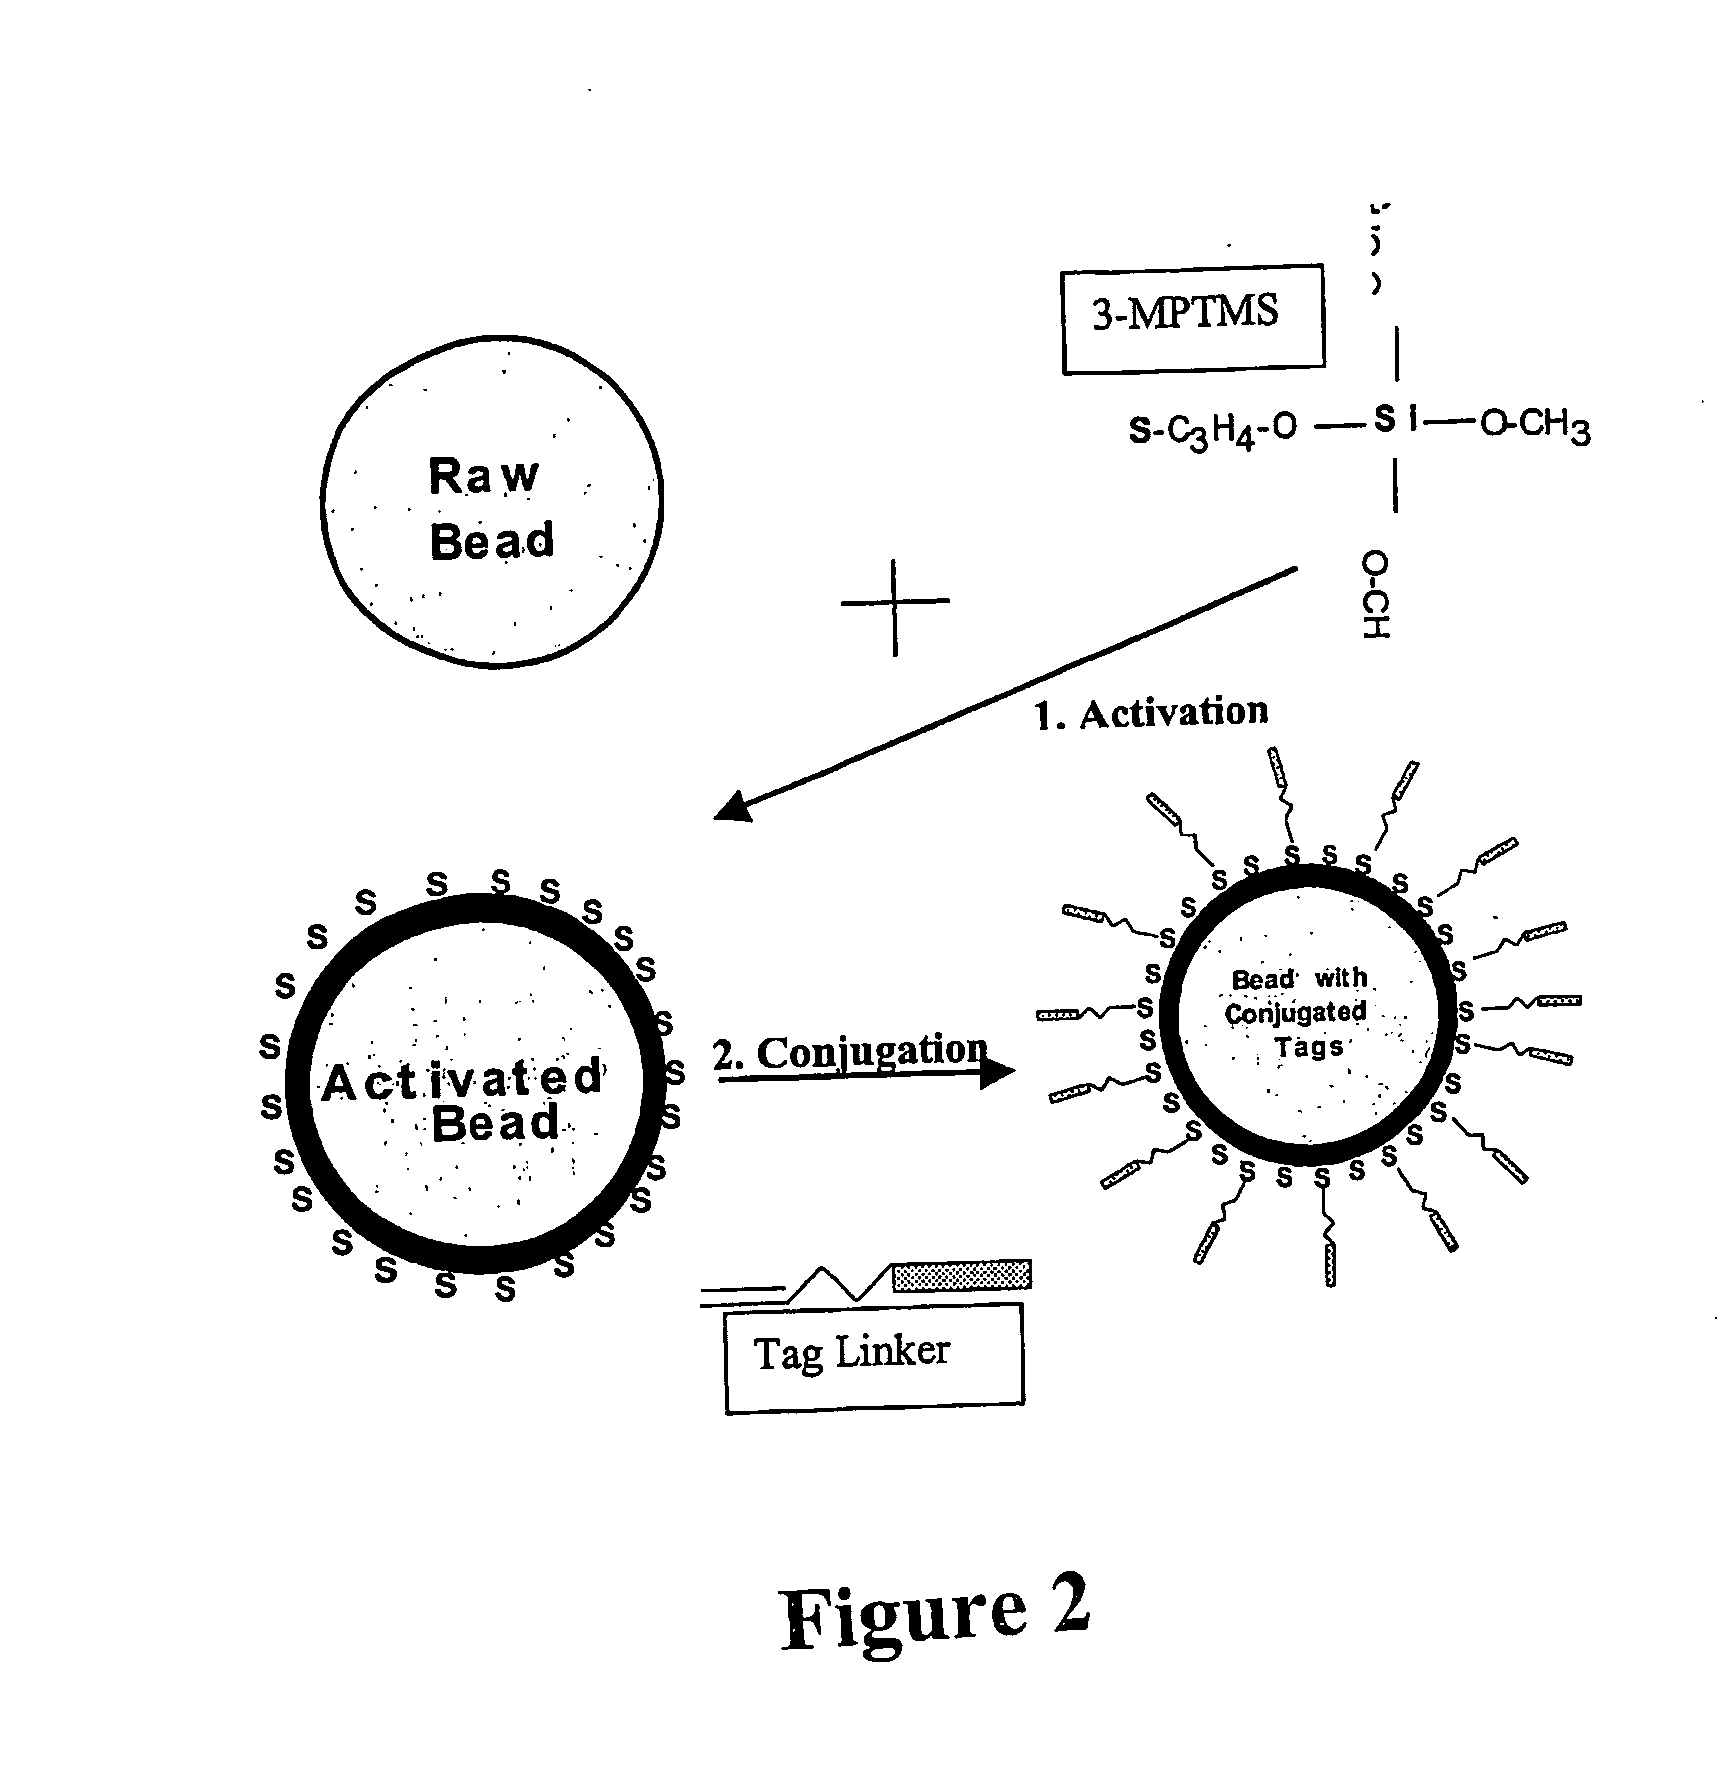 Nucleic acid anchoring system comprising covalent linkage of an oligonucleotide to a solid support